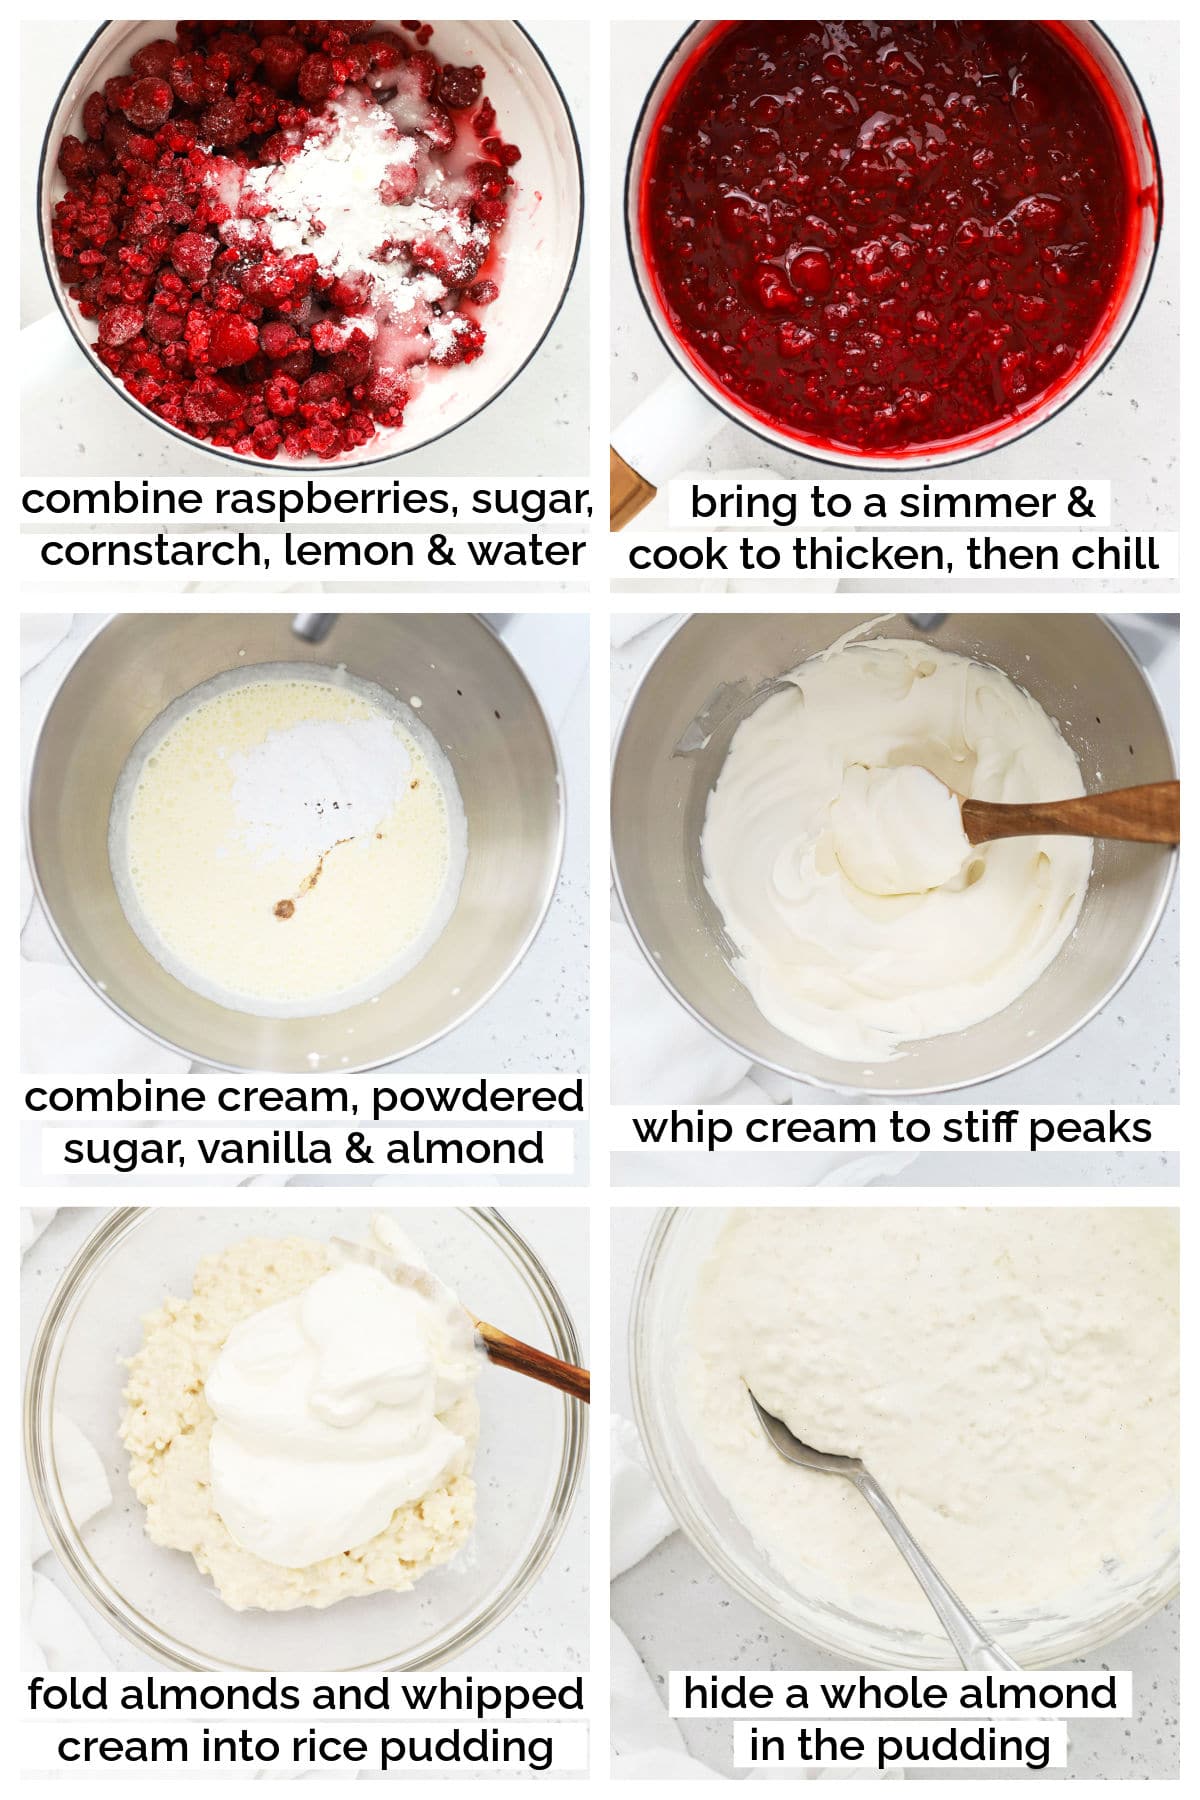 making raspberry sauce and risalamande, step by step